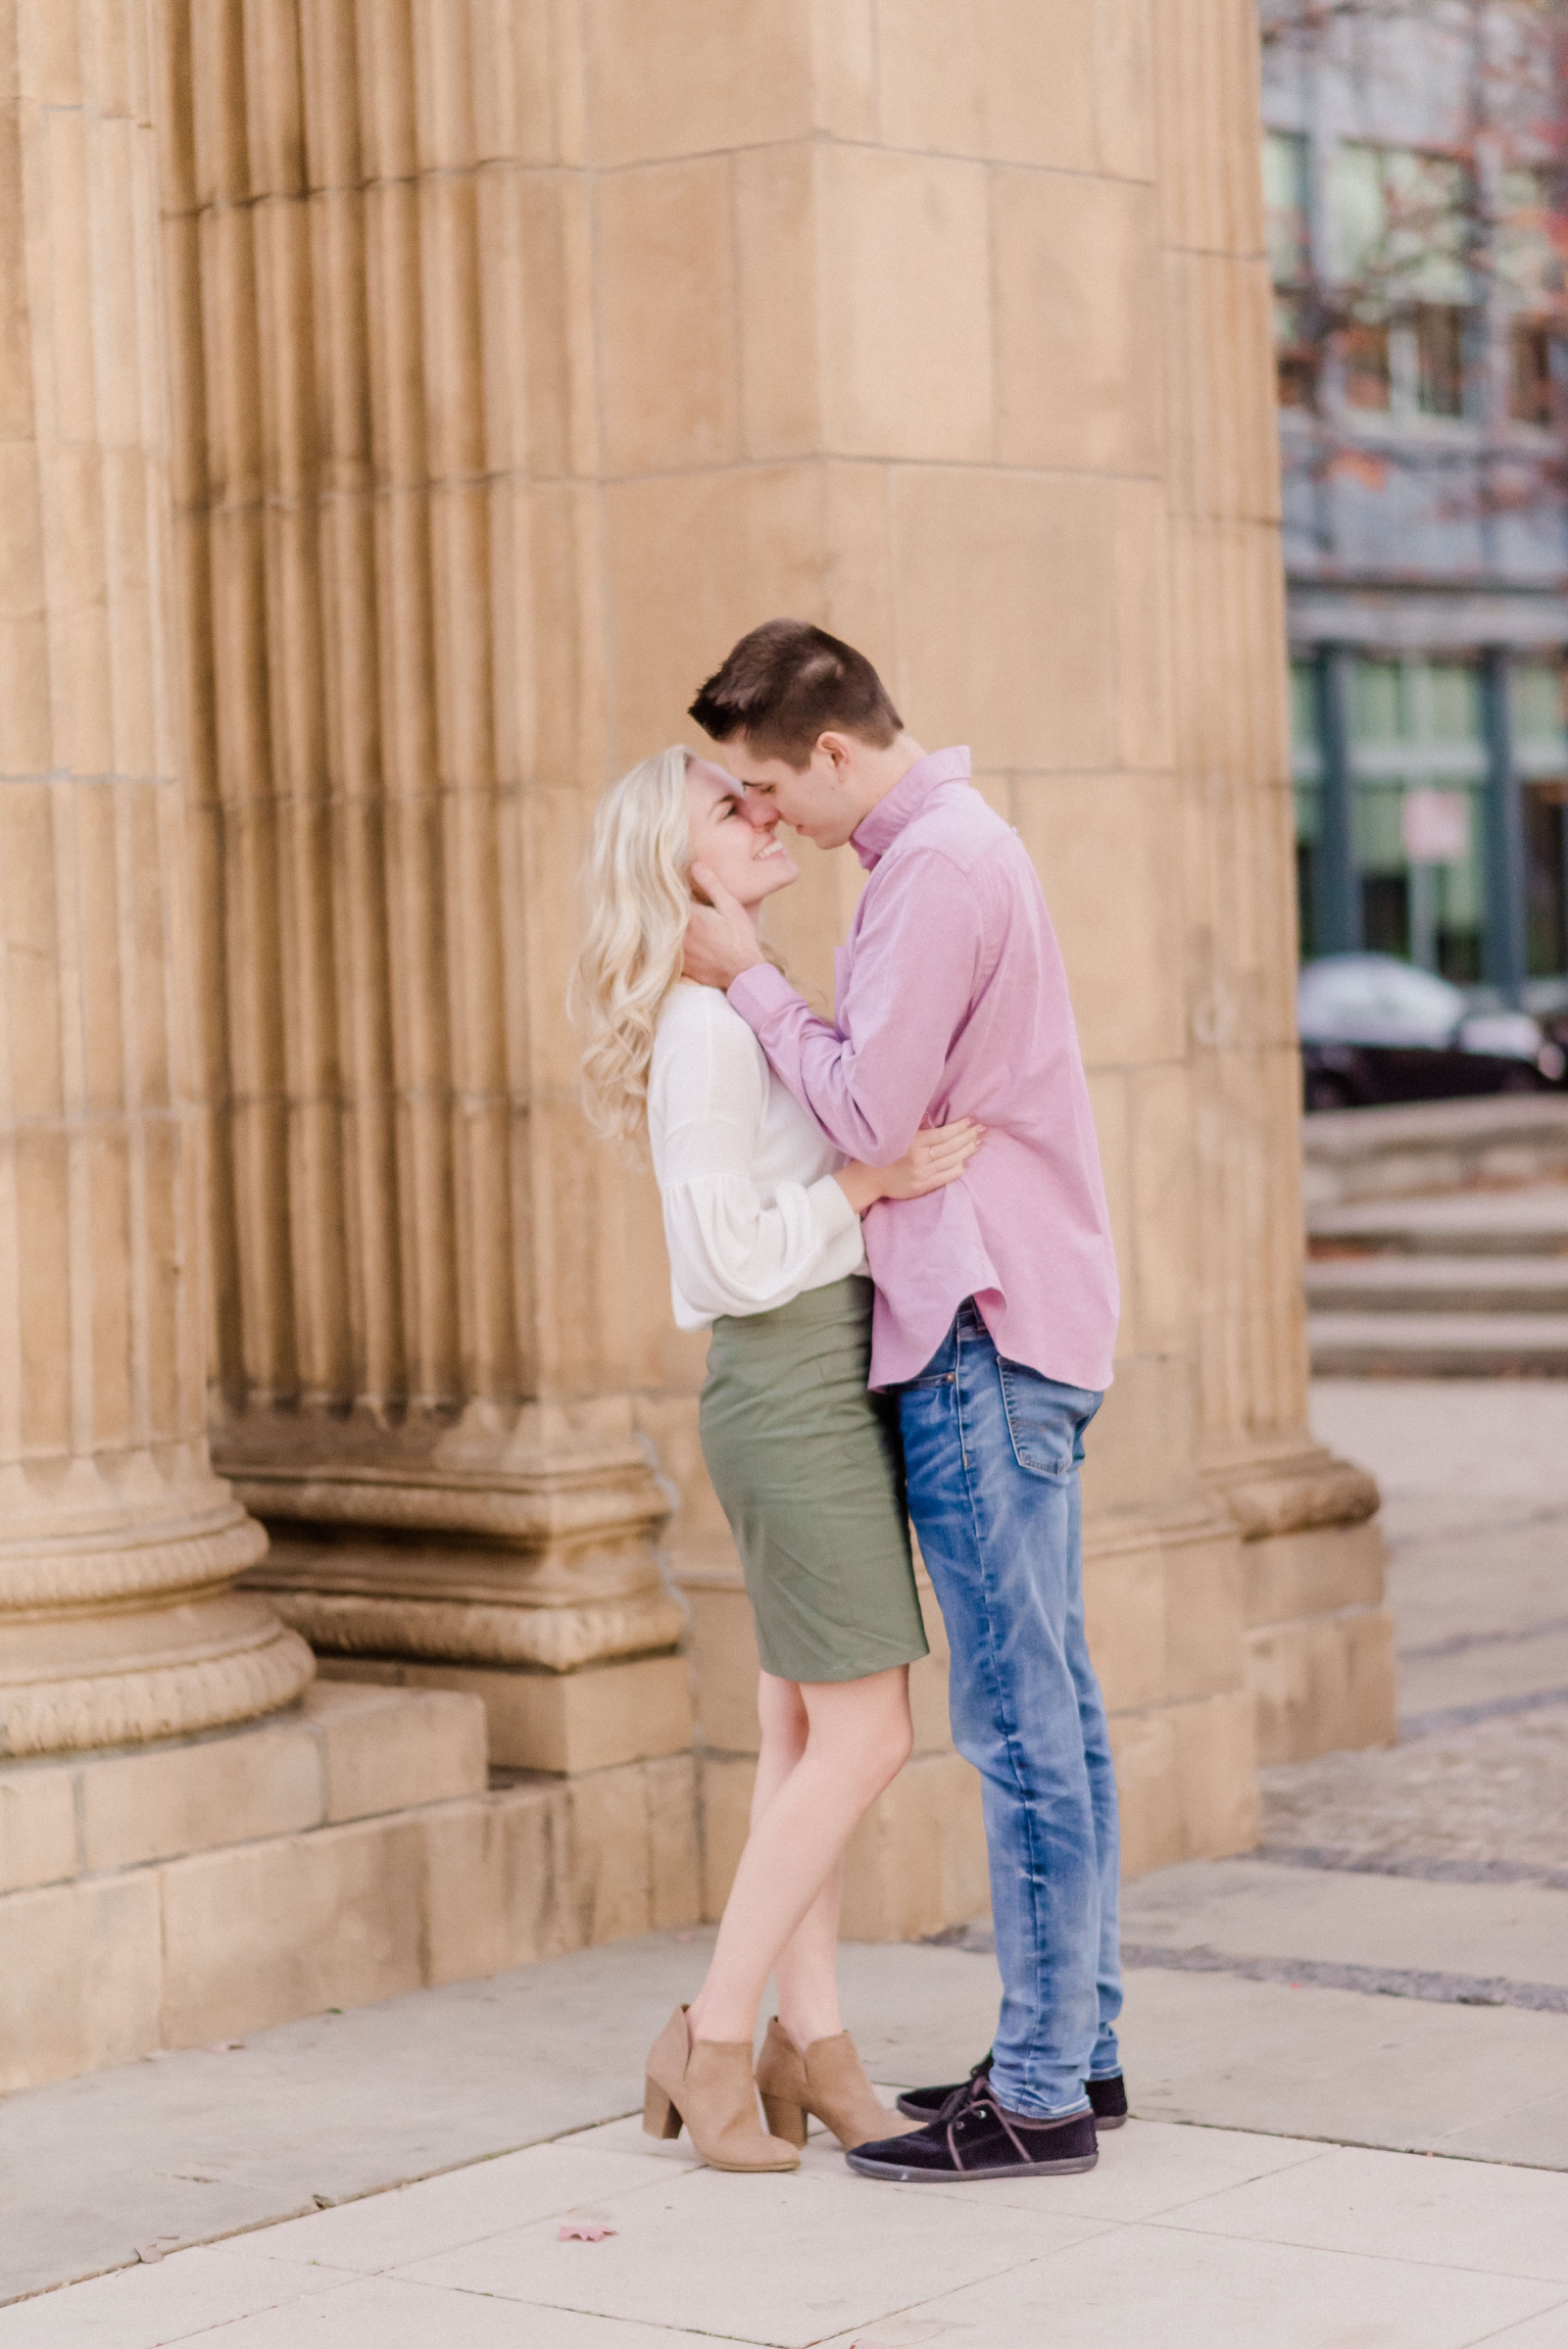 Engagement session in Uptown Westerville, Ohio | Transparency Photography